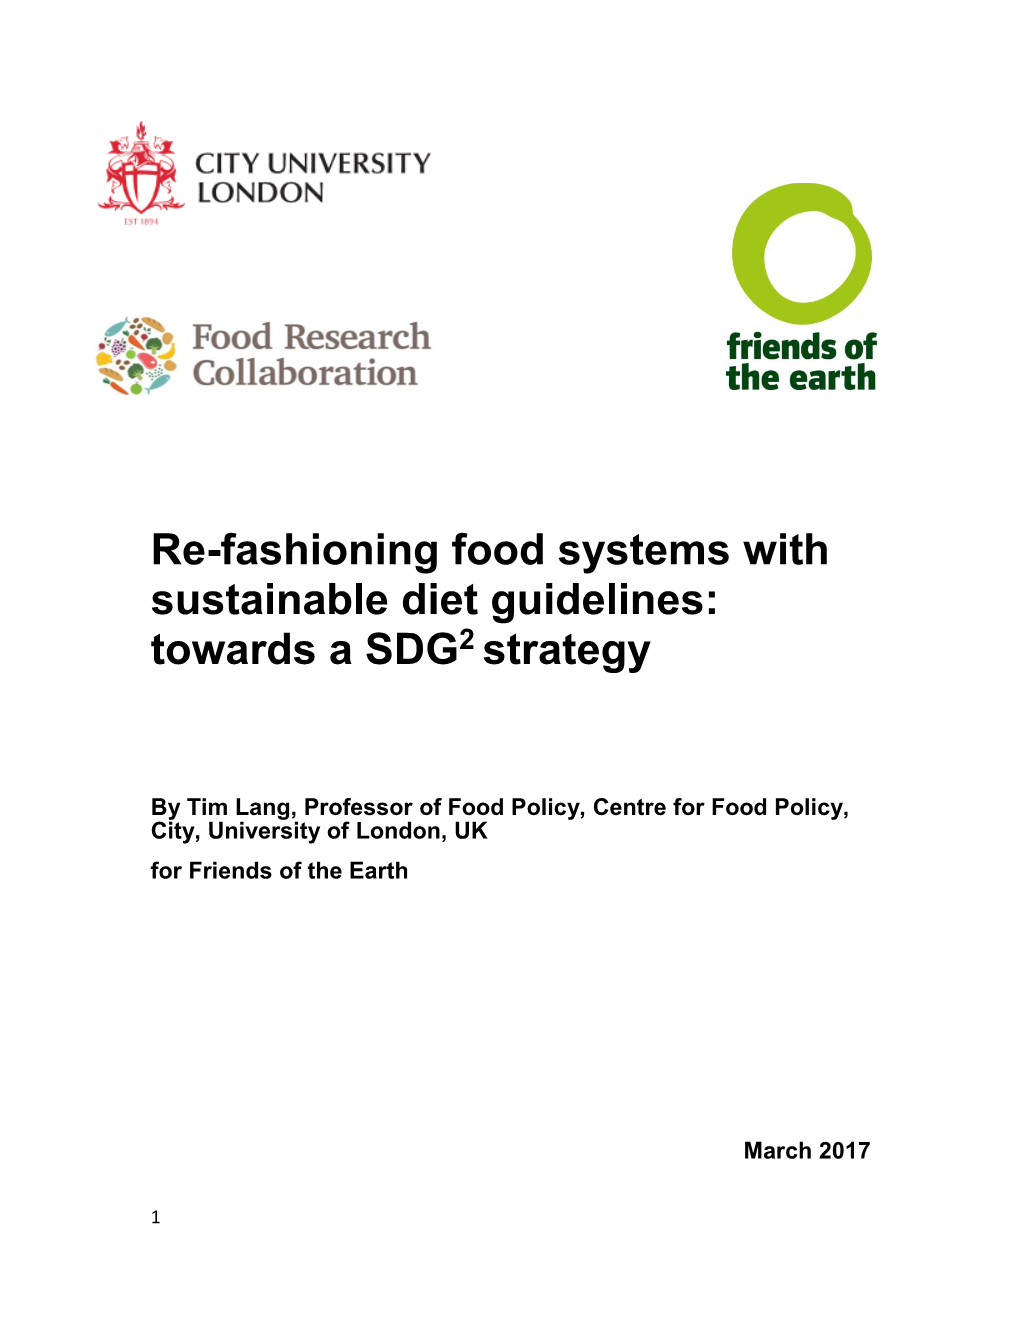 Re-Fashioning Food Systems with Sustainable Diet Guidelines: Towards a SDG2 Strategy